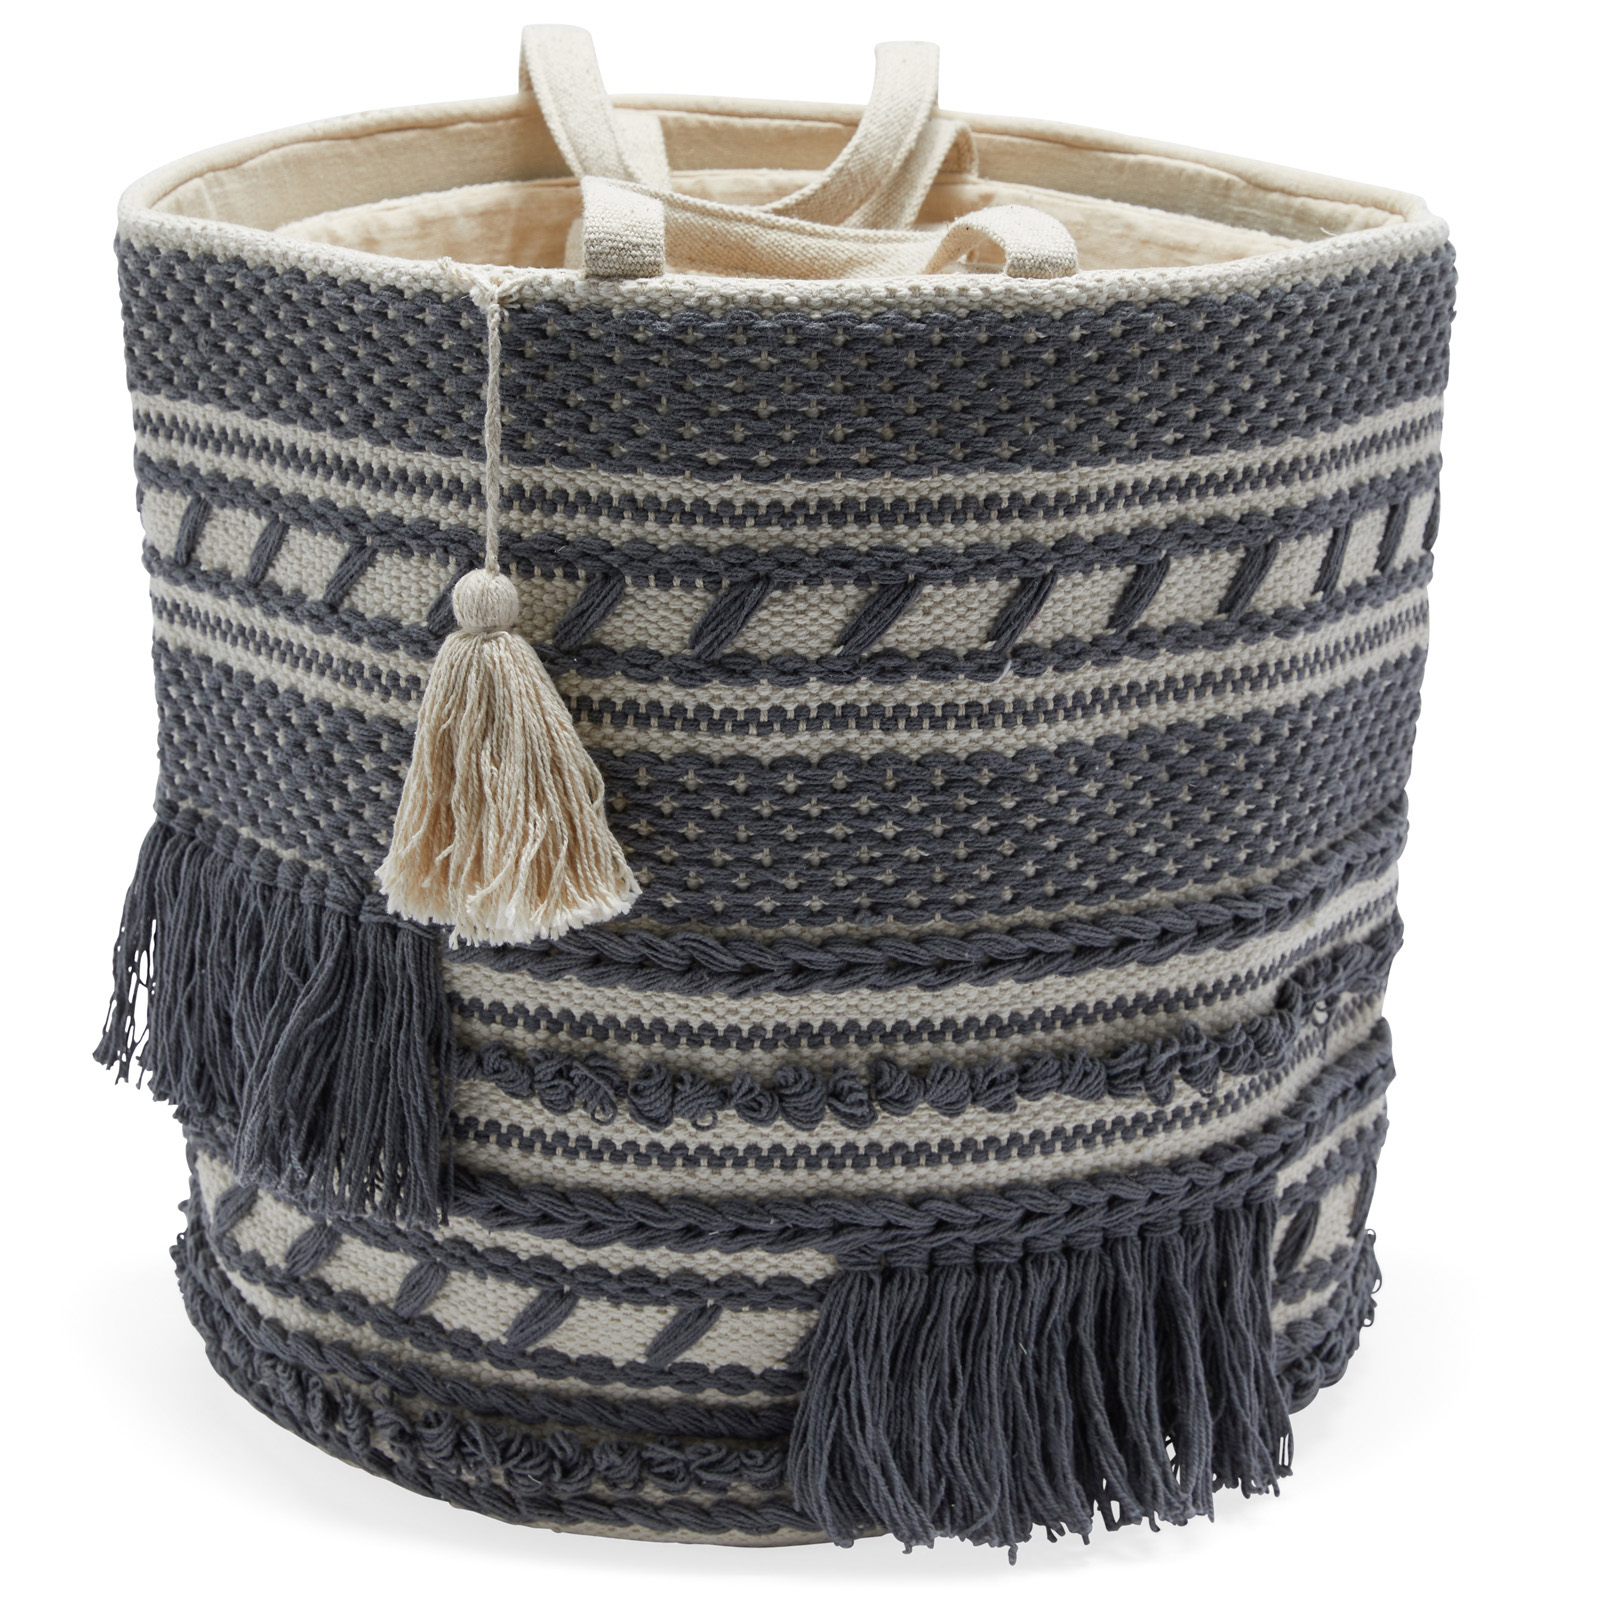 Hand Woven Macrame 3 Piece Basket Set, Natural and Charcoal by Drew Barrymore Flower Home - image 3 of 10